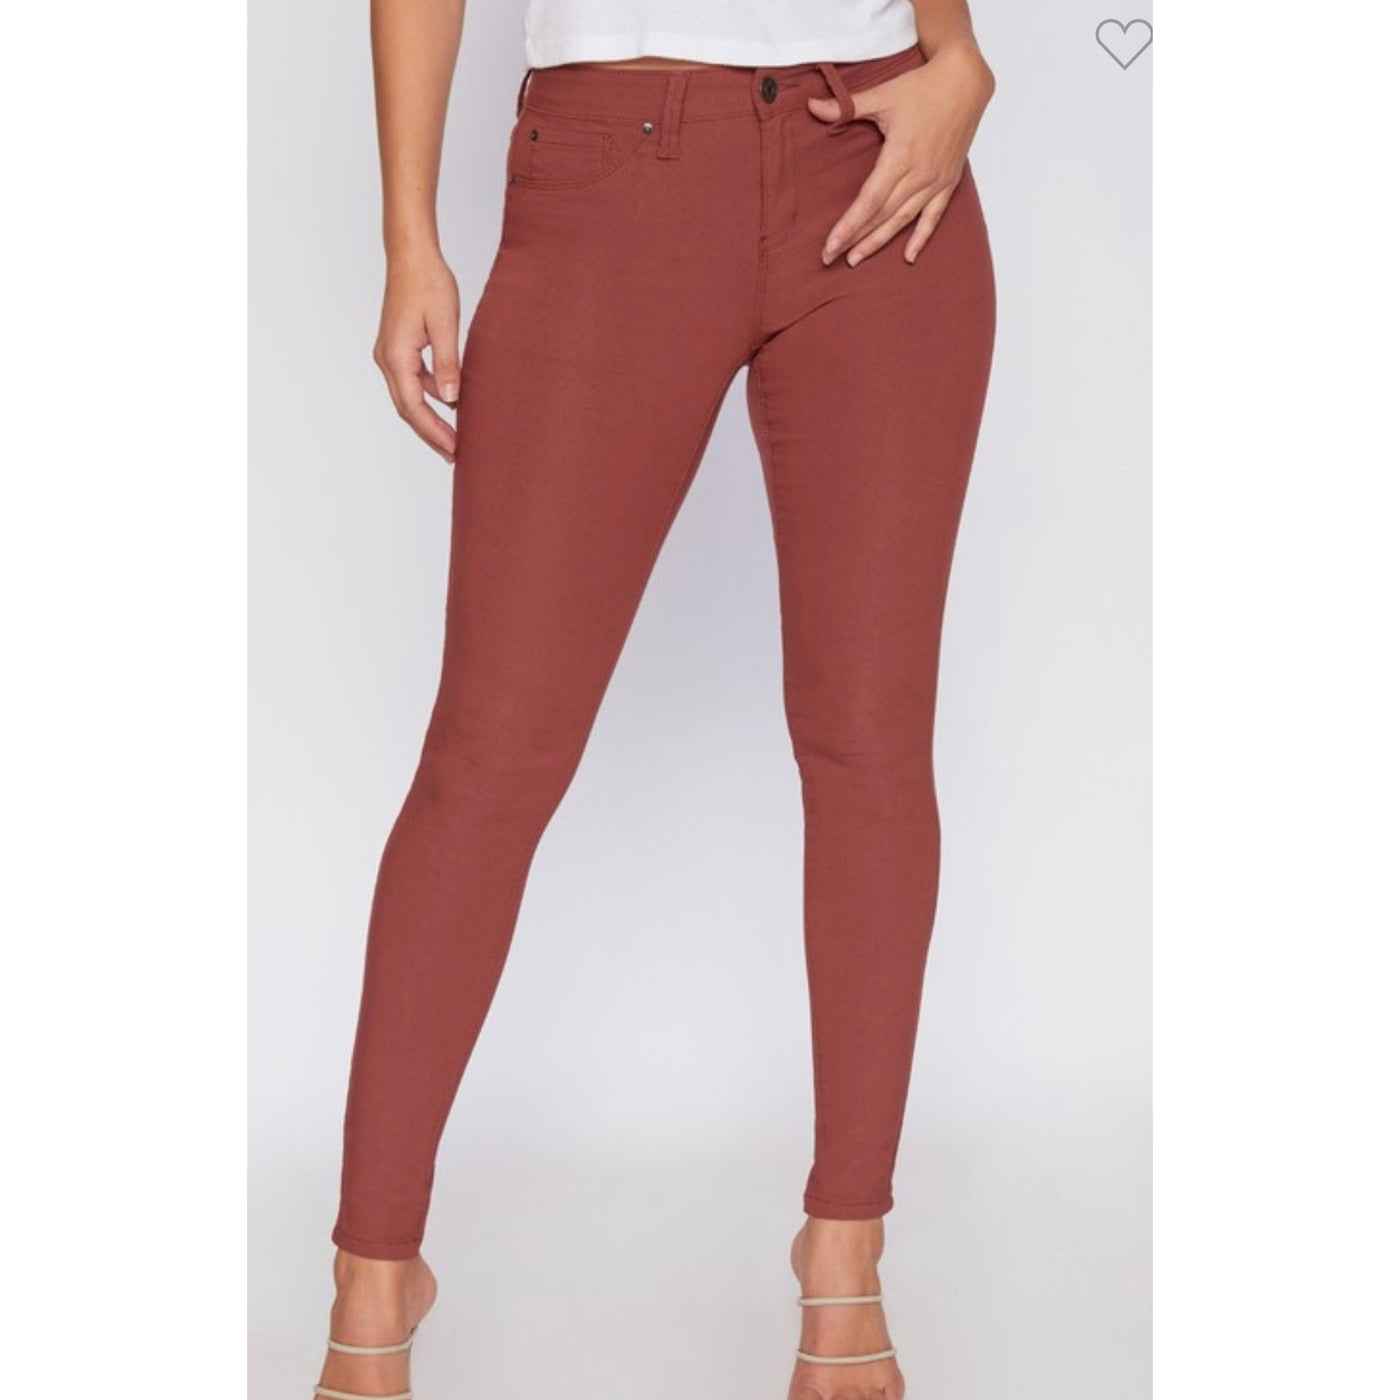 Cassie Mid Rise Skinny - Available in 5 Colors